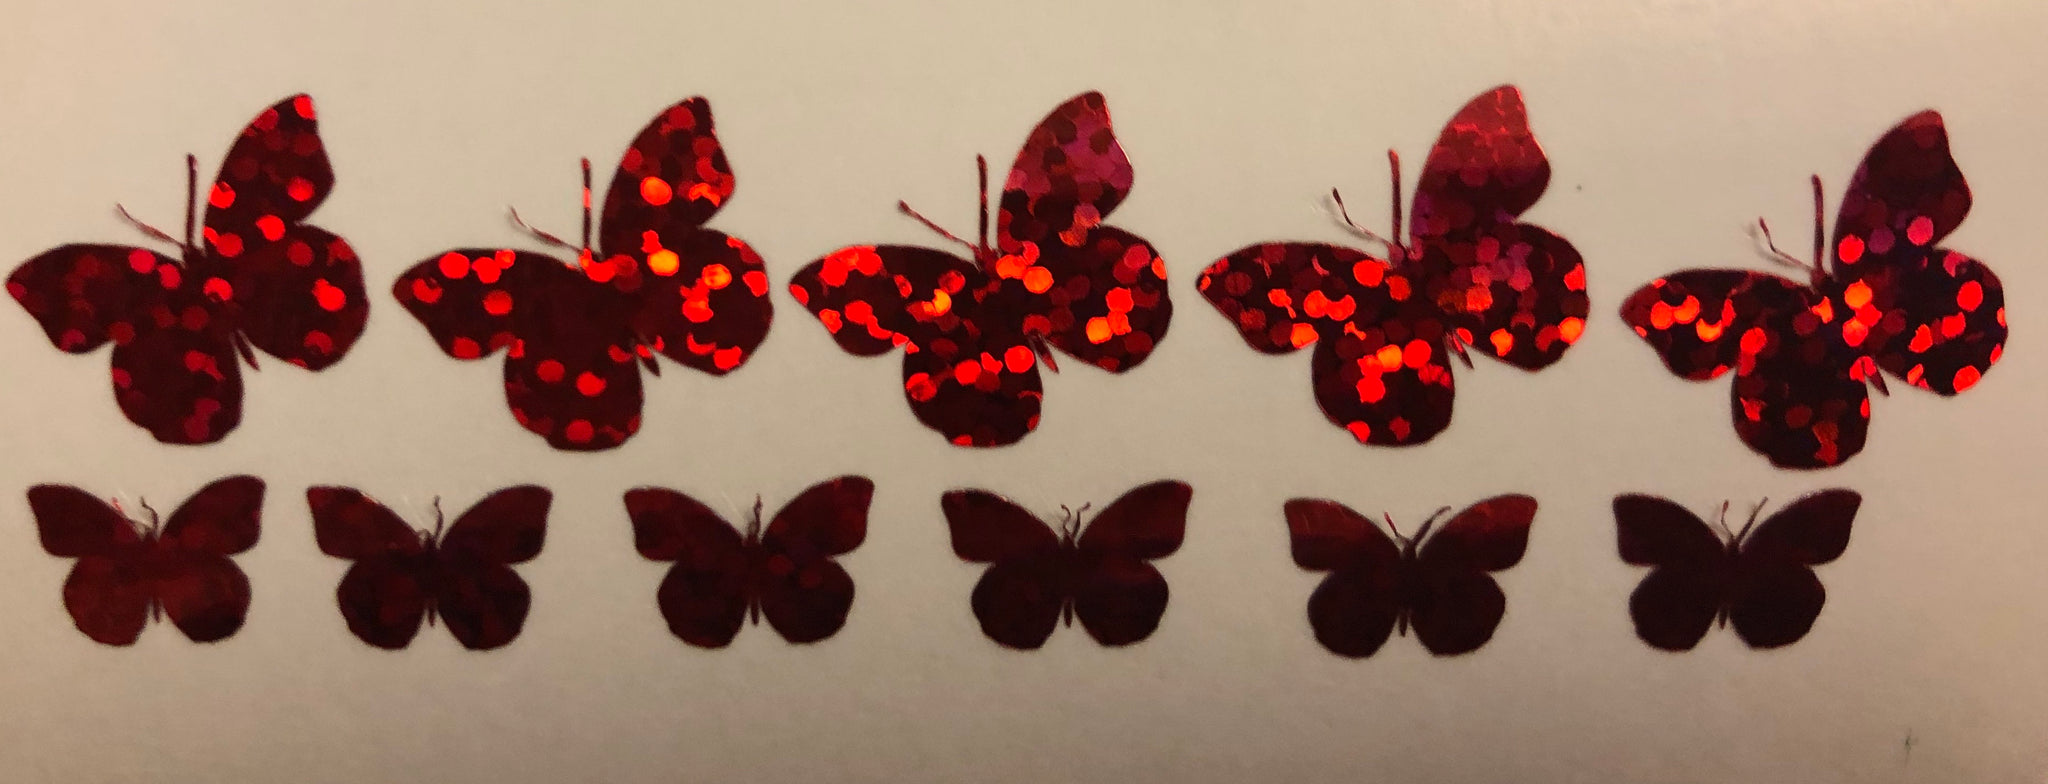 Red holographic butterflies